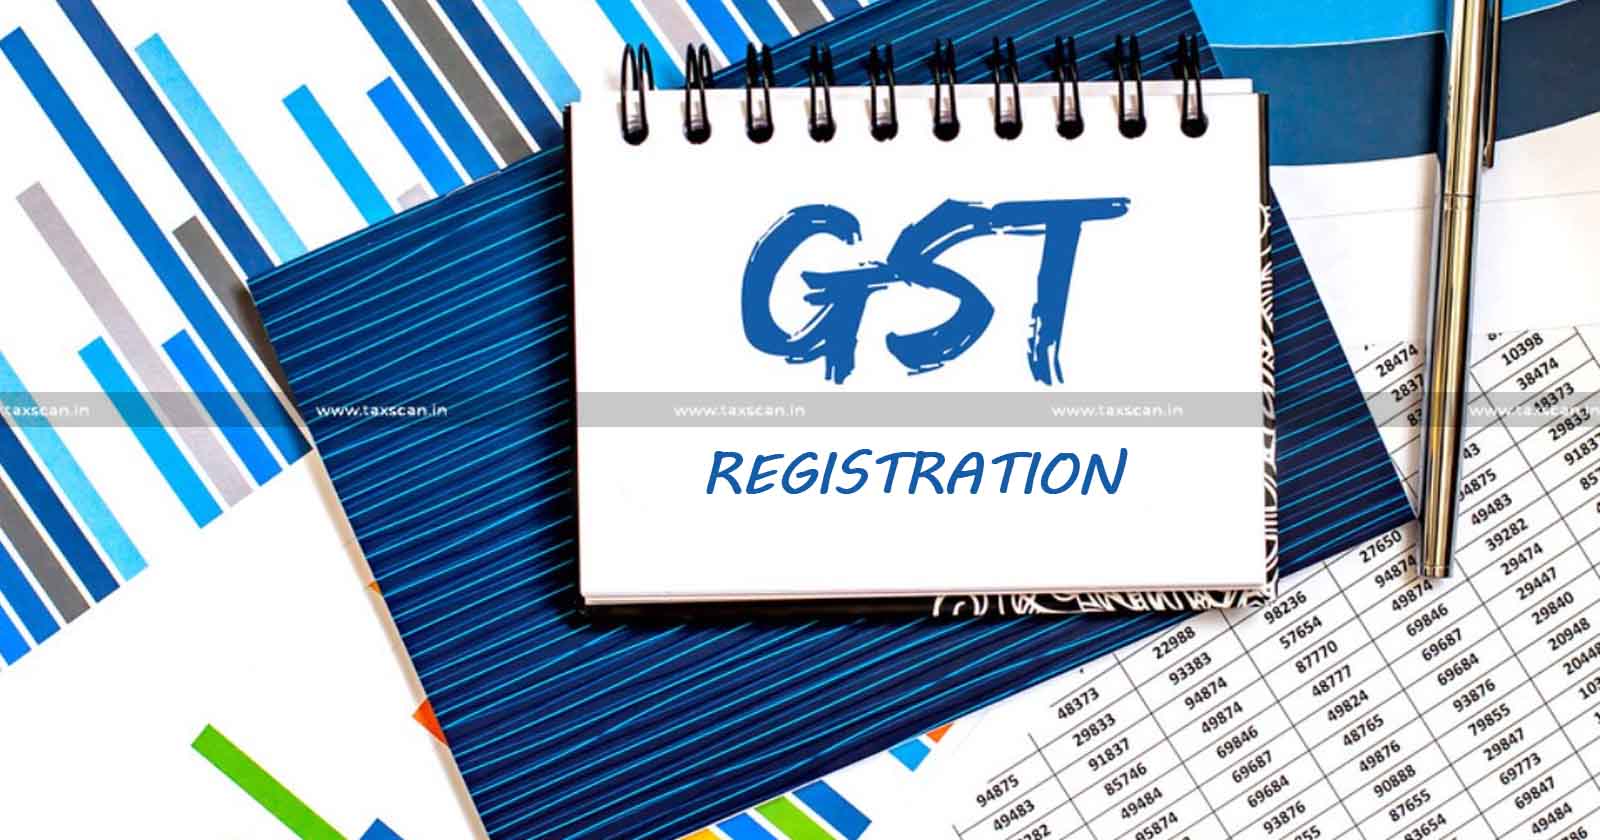 No - Clear - Reasons - for - Violations - alleged - AP - HC - Cancellation - of - GST - Registration - TAXSCAN